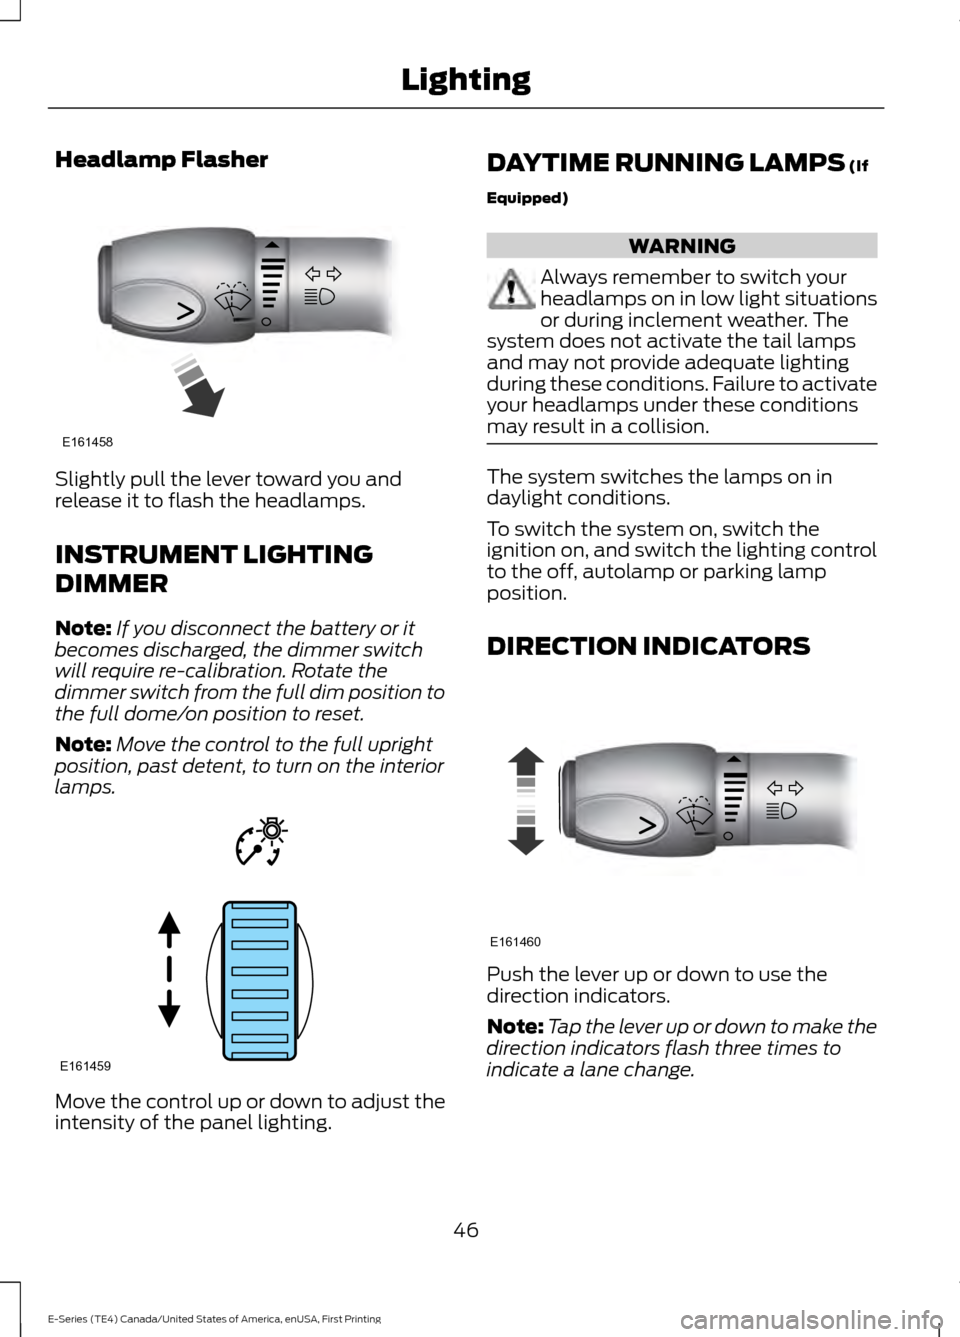 FORD E SERIES 2017 4.G Service Manual Headlamp Flasher
Slightly pull the lever toward you and
release it to flash the headlamps.
INSTRUMENT LIGHTING
DIMMER
Note:
If you disconnect the battery or it
becomes discharged, the dimmer switch
wi